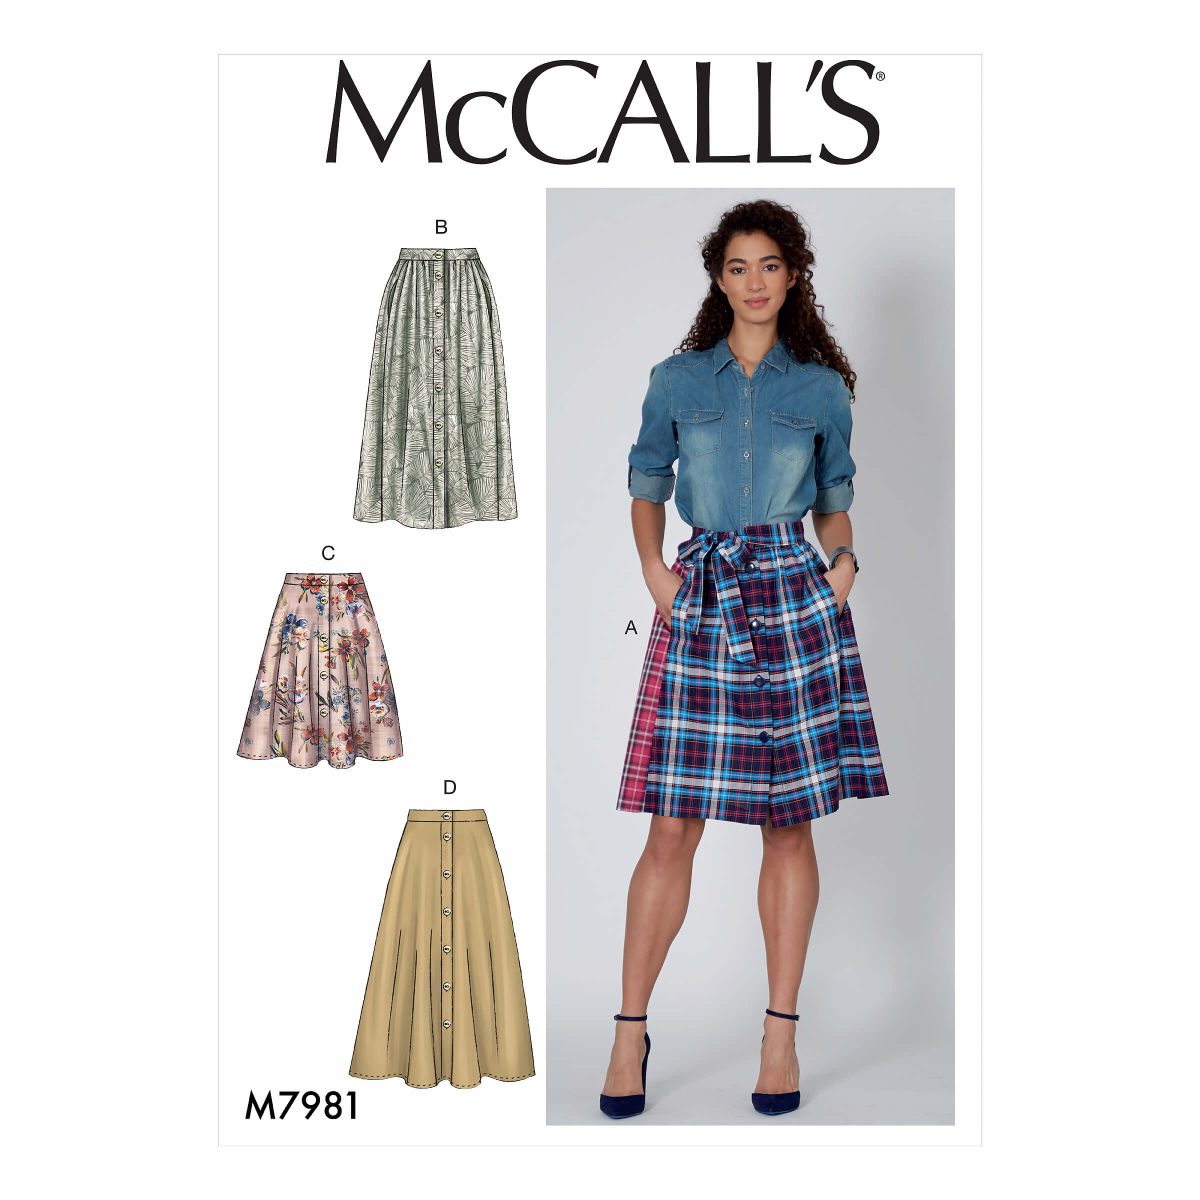 McCall's Sewing Pattern M7981 Misses' Skirts